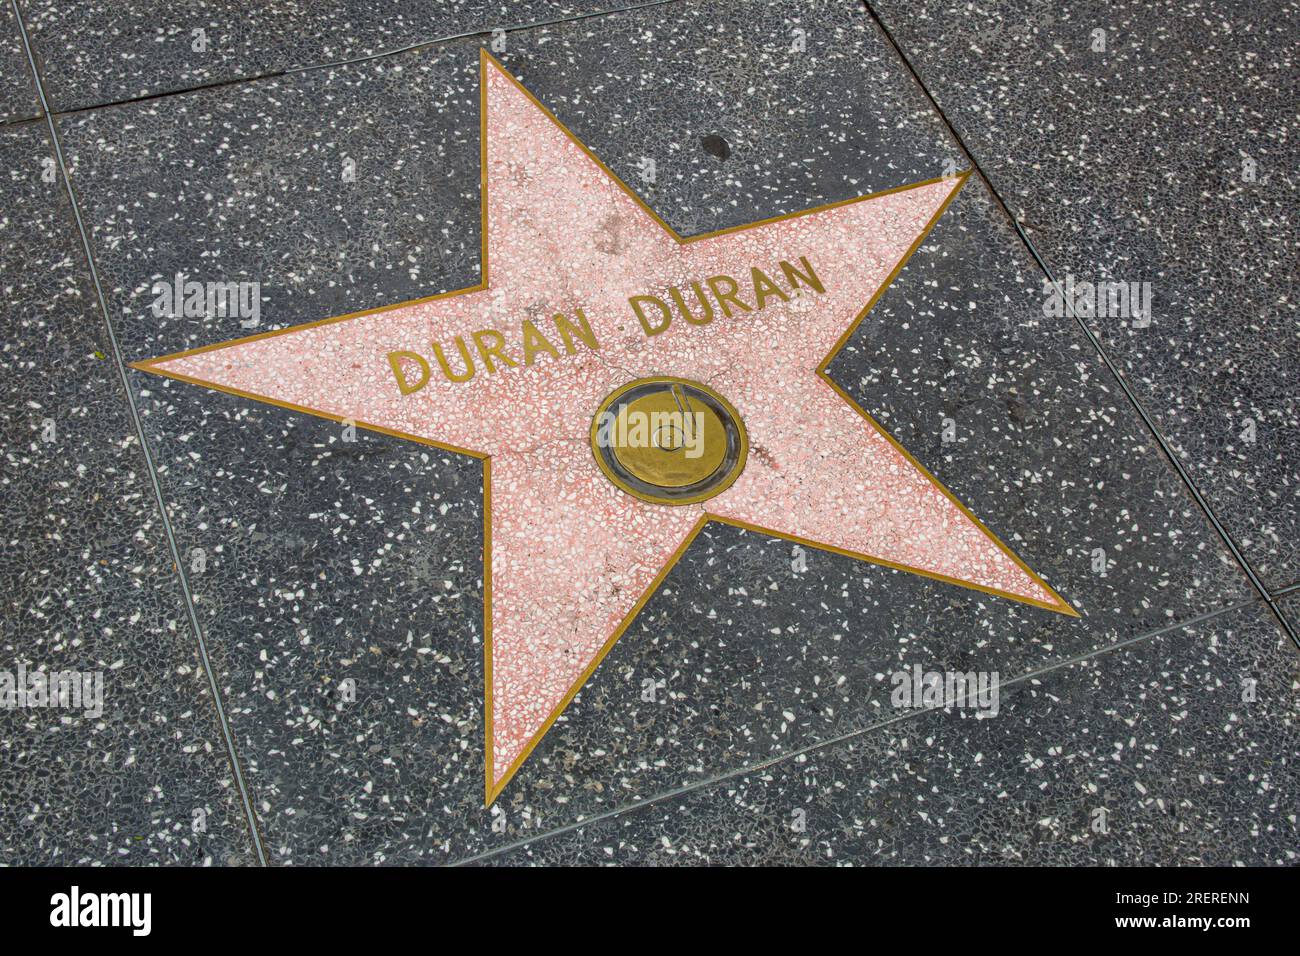 Duran Duran's star on the Hollywood Walk of Fame is in front of the Capitol Records Tower. Stock Photo